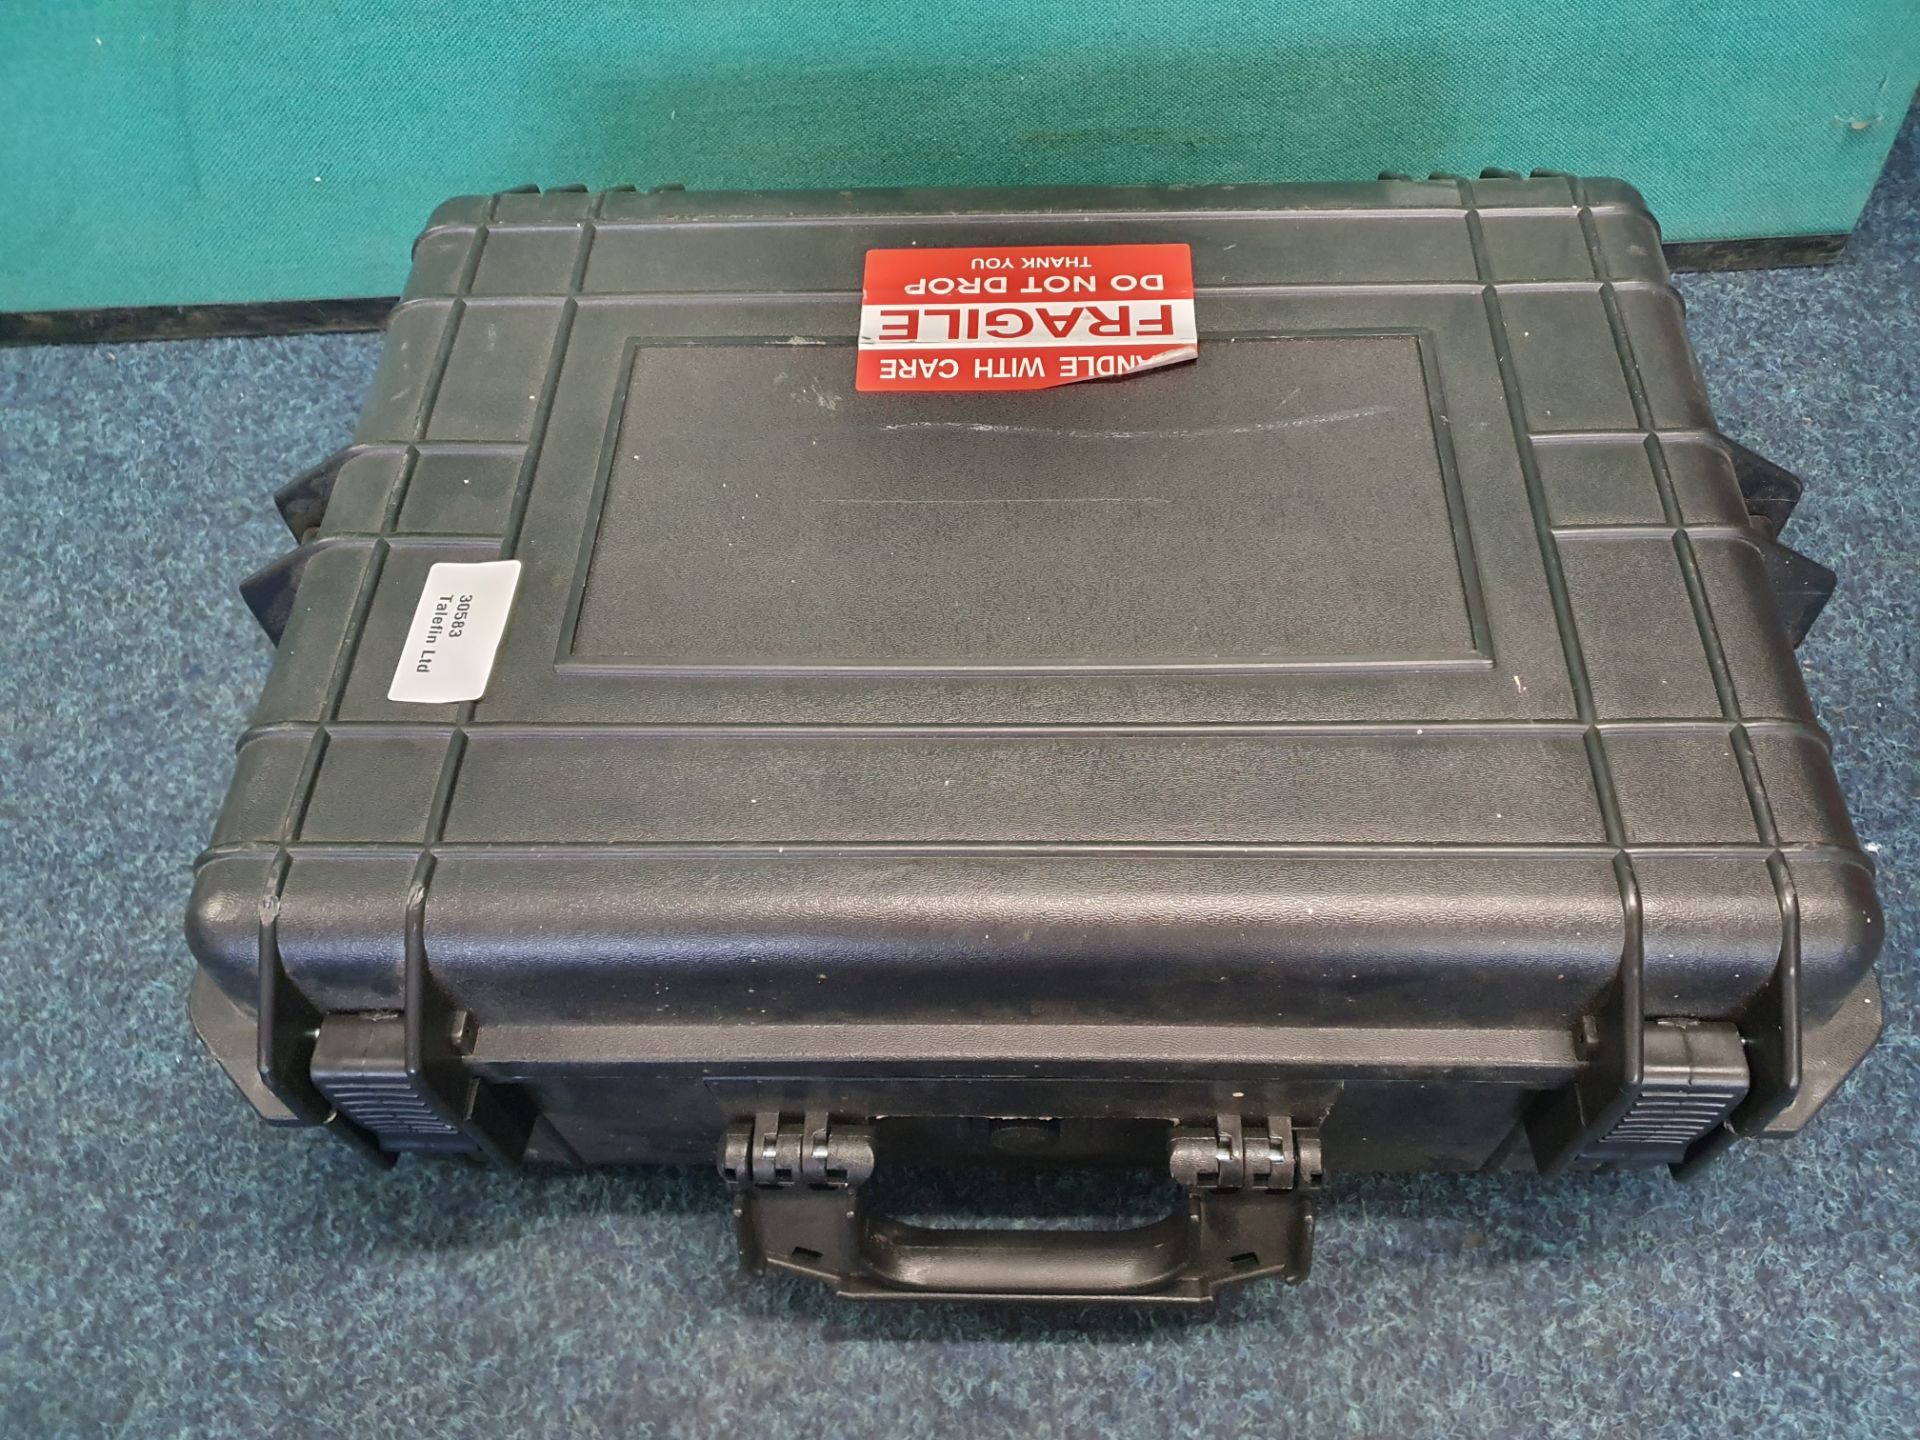 3 x Secure Carry Cases - Image 3 of 7